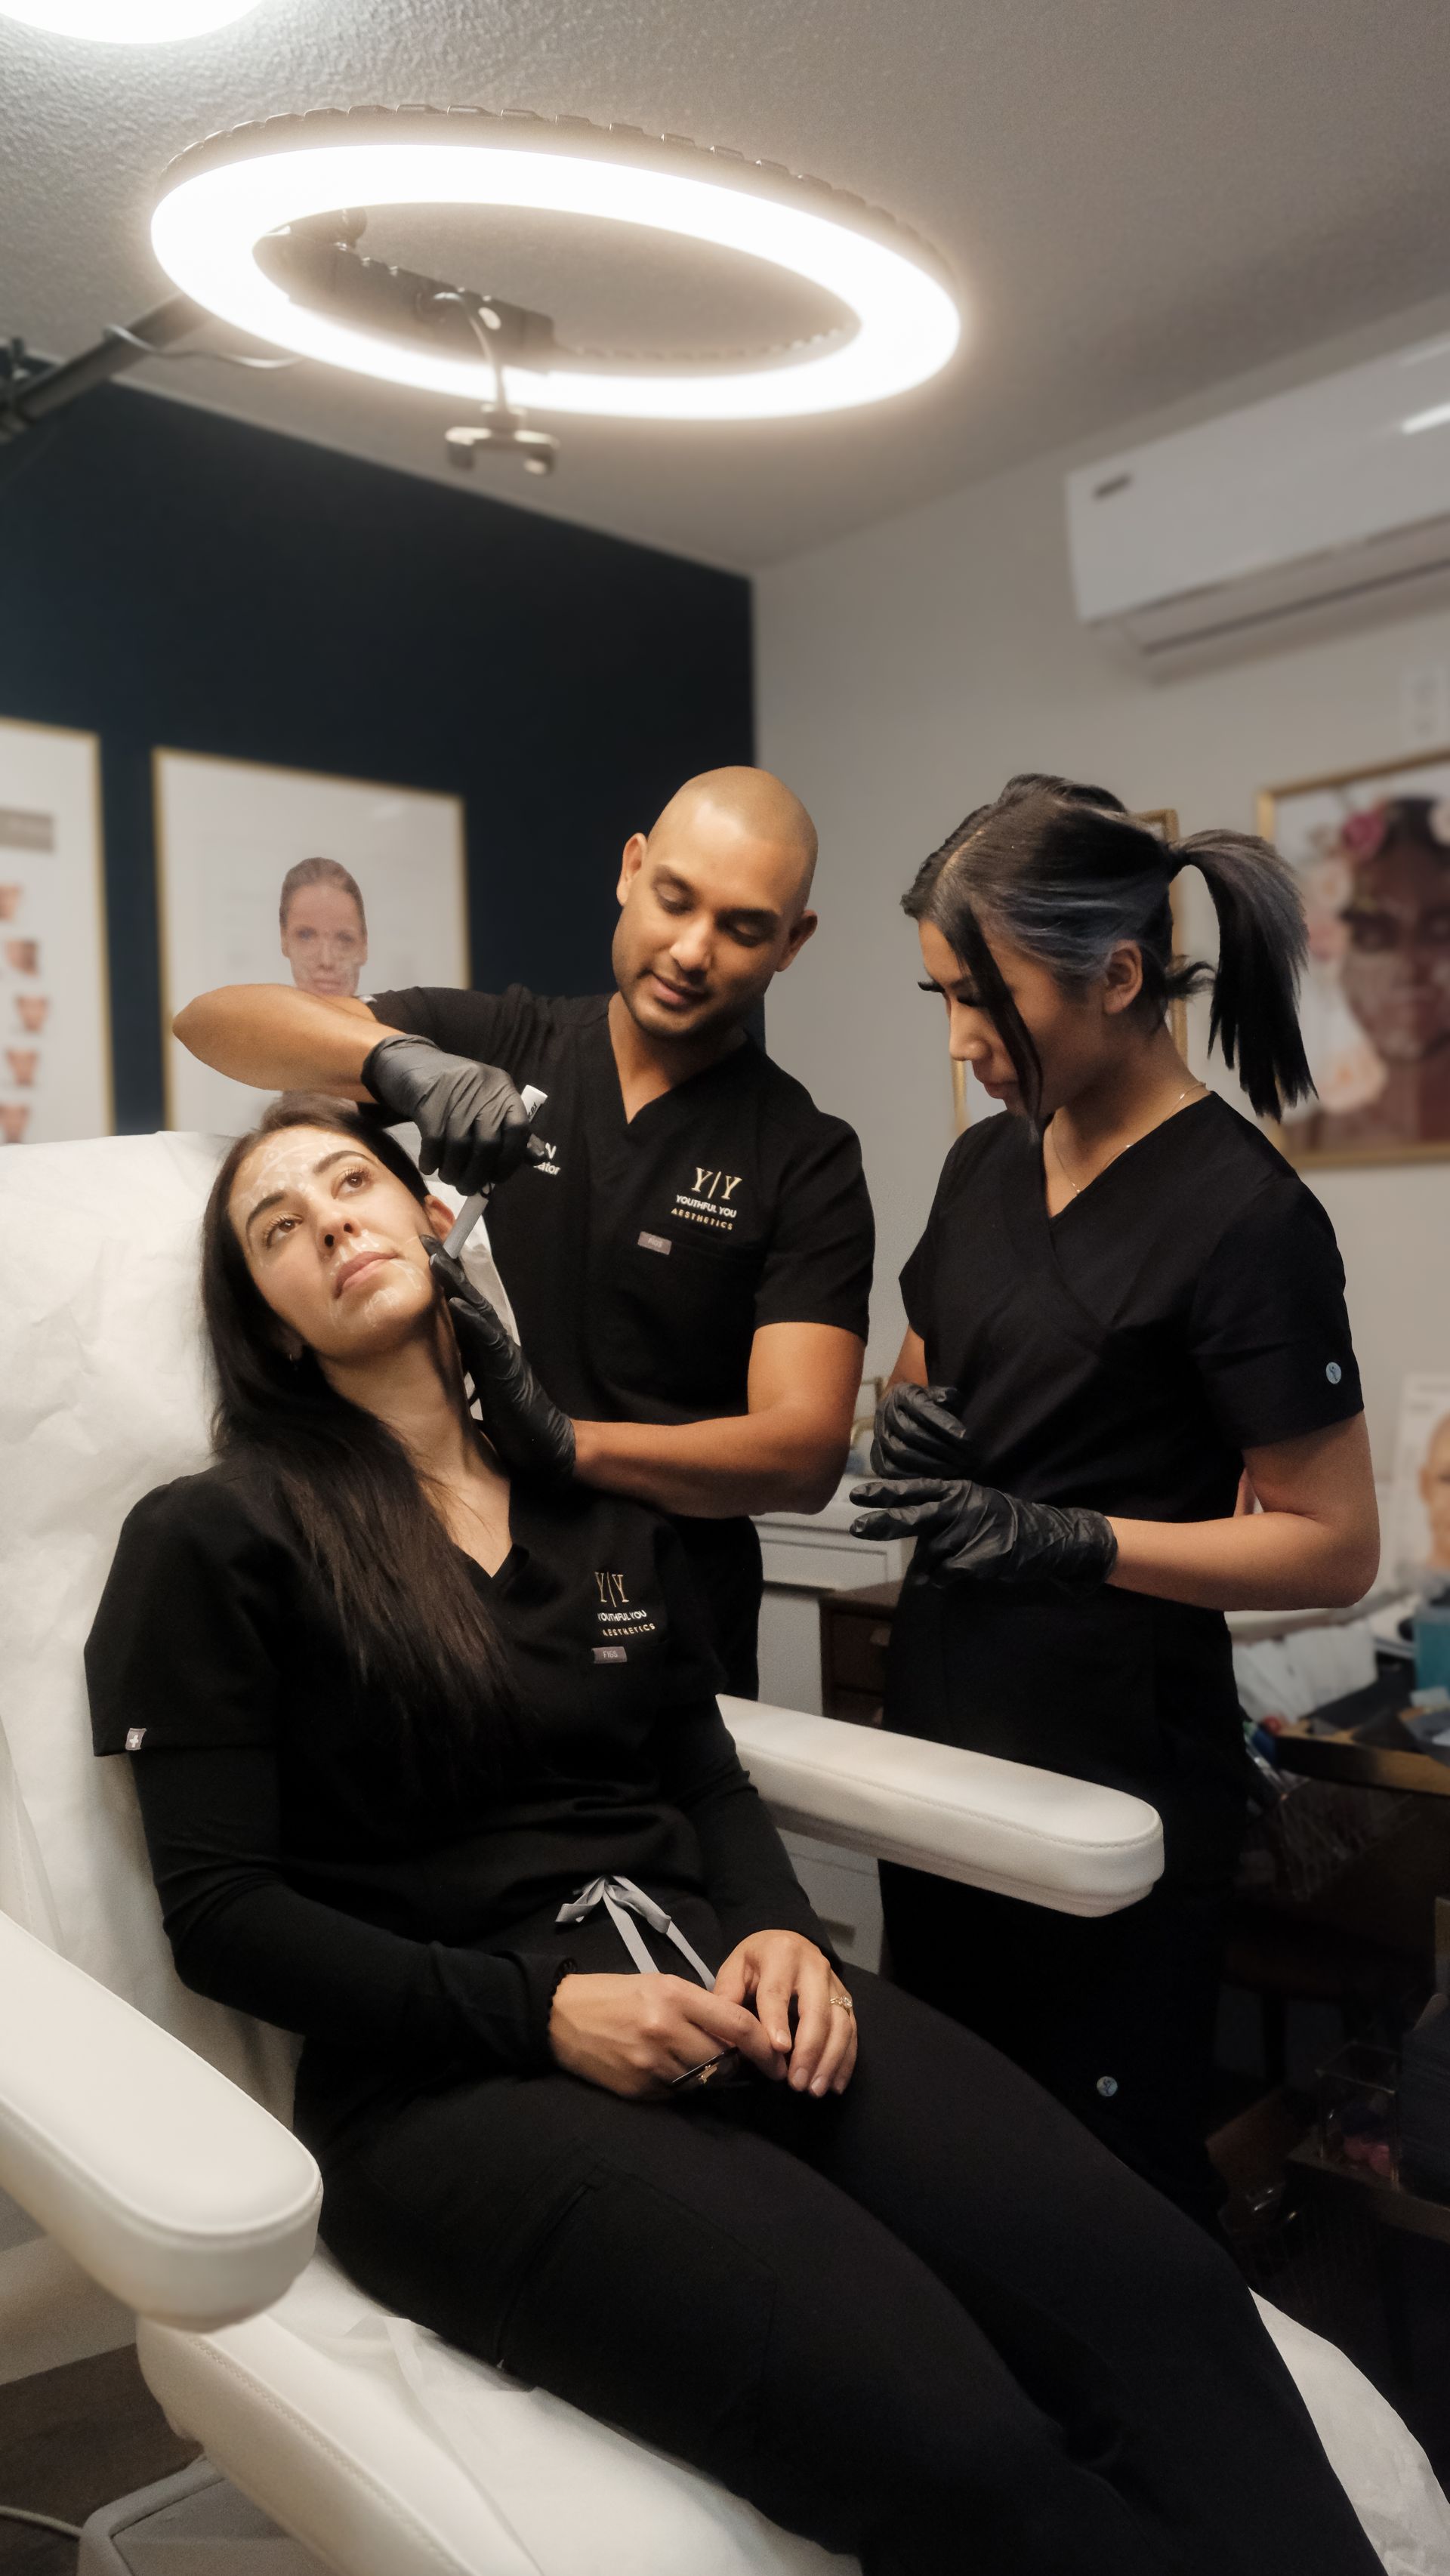 two women are working on a woman 's eyebrows in a salon .